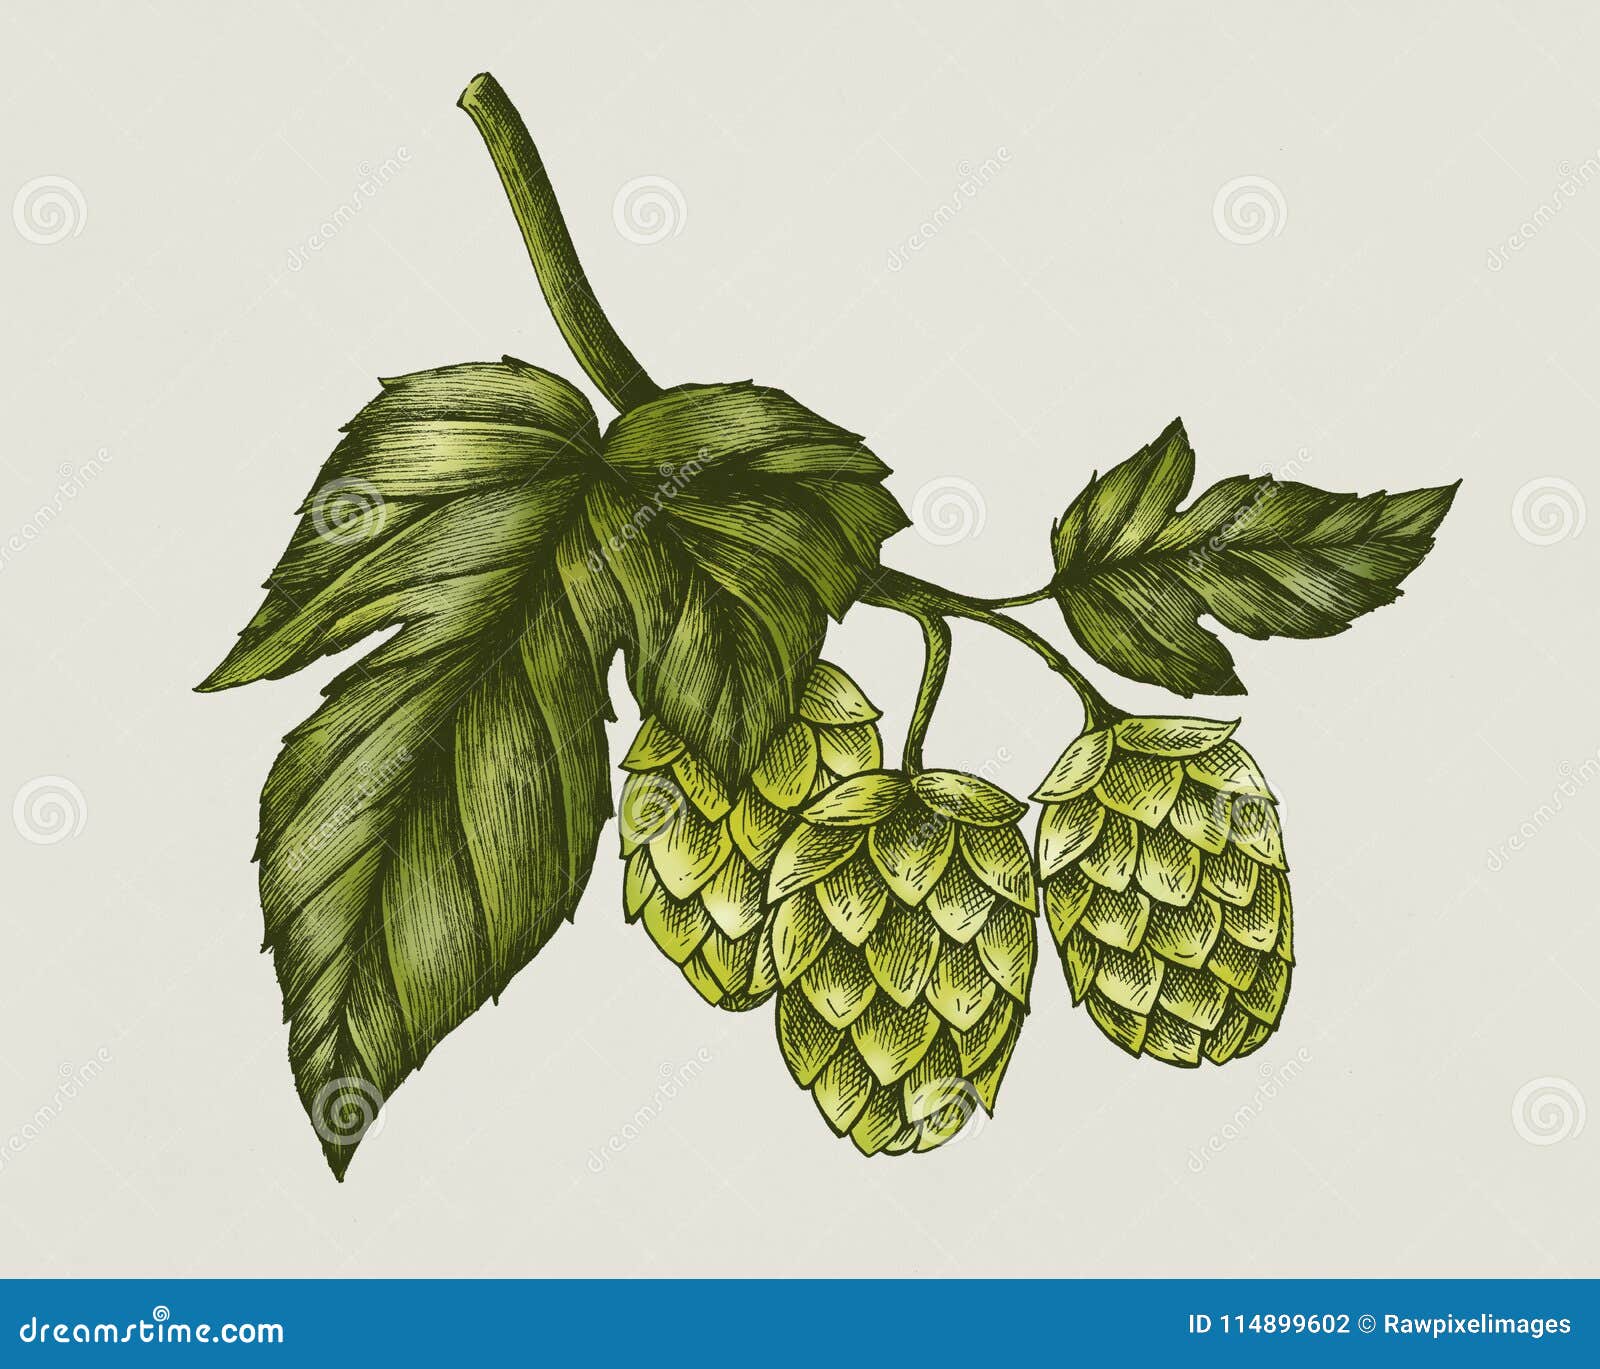 hand-drawn hops, flavoring and stability agent in beer